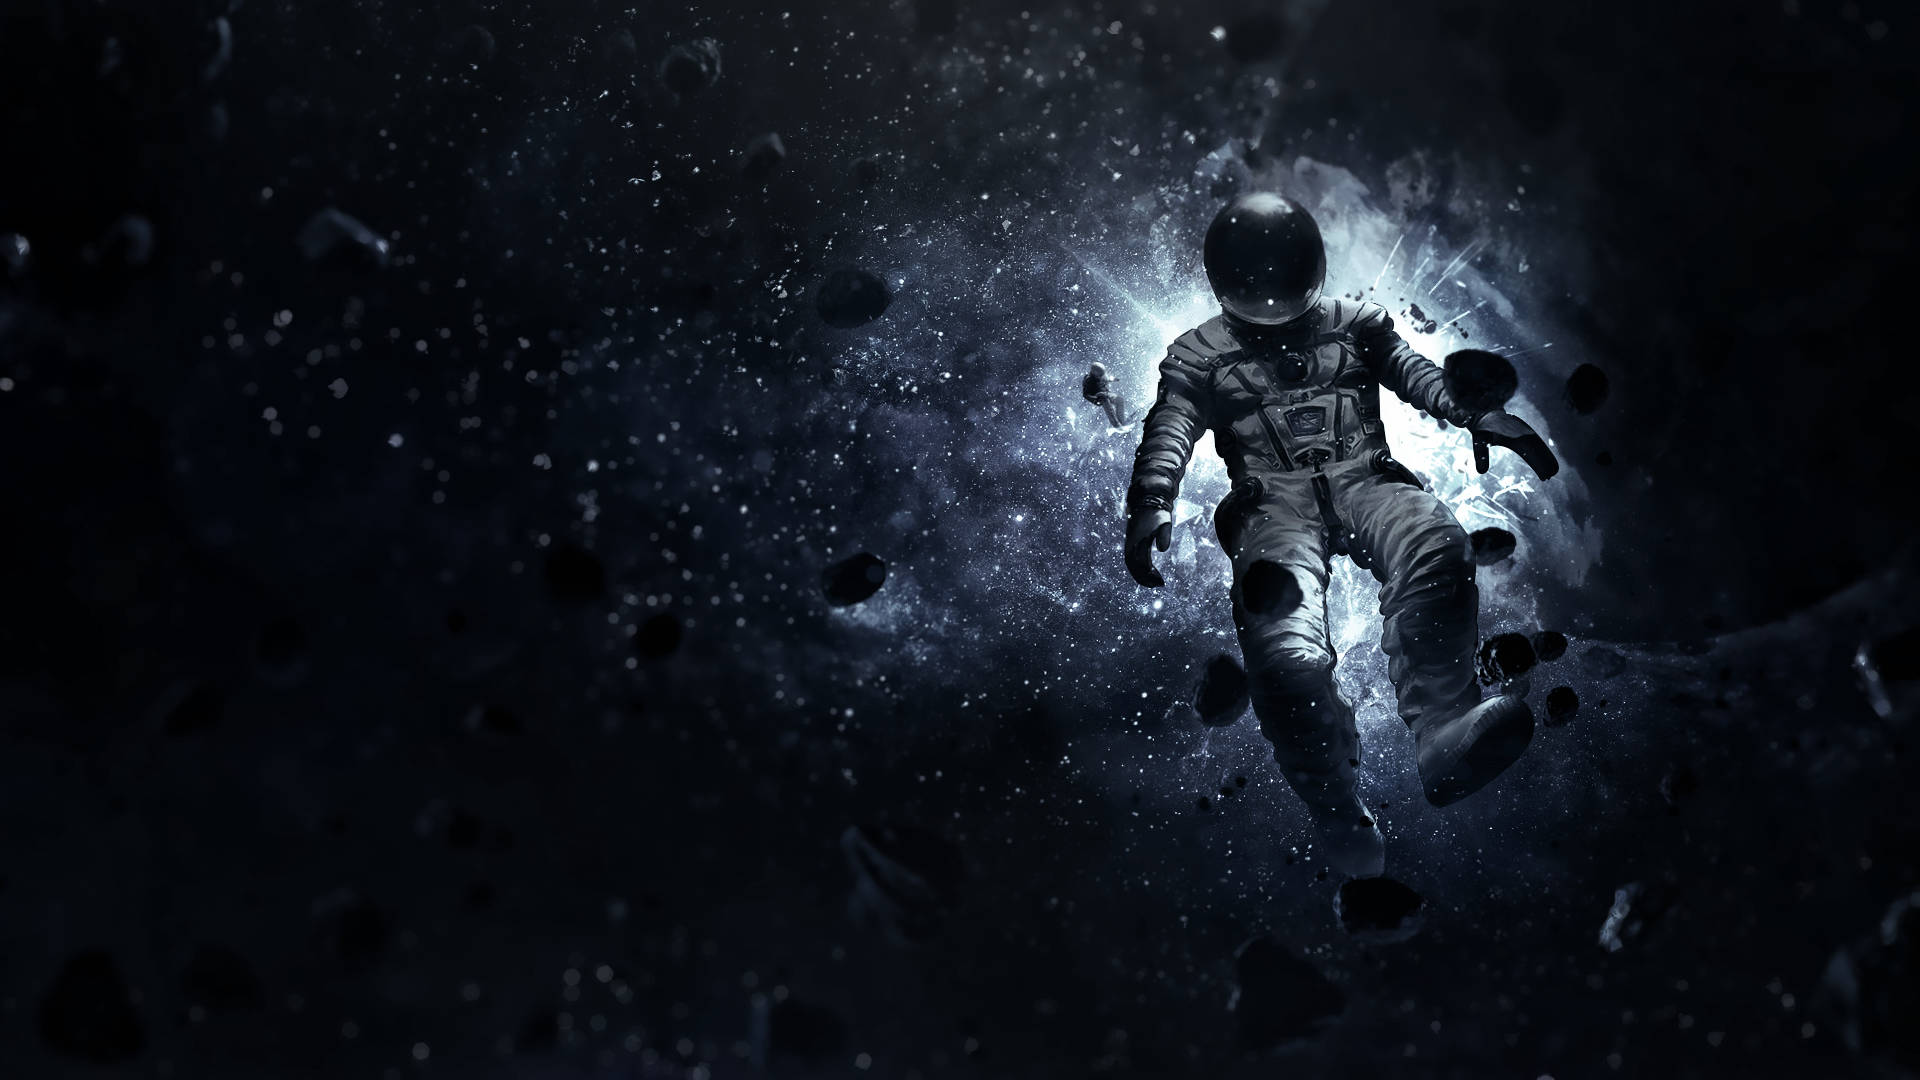 Astronaut Aesthetic Floating In Space